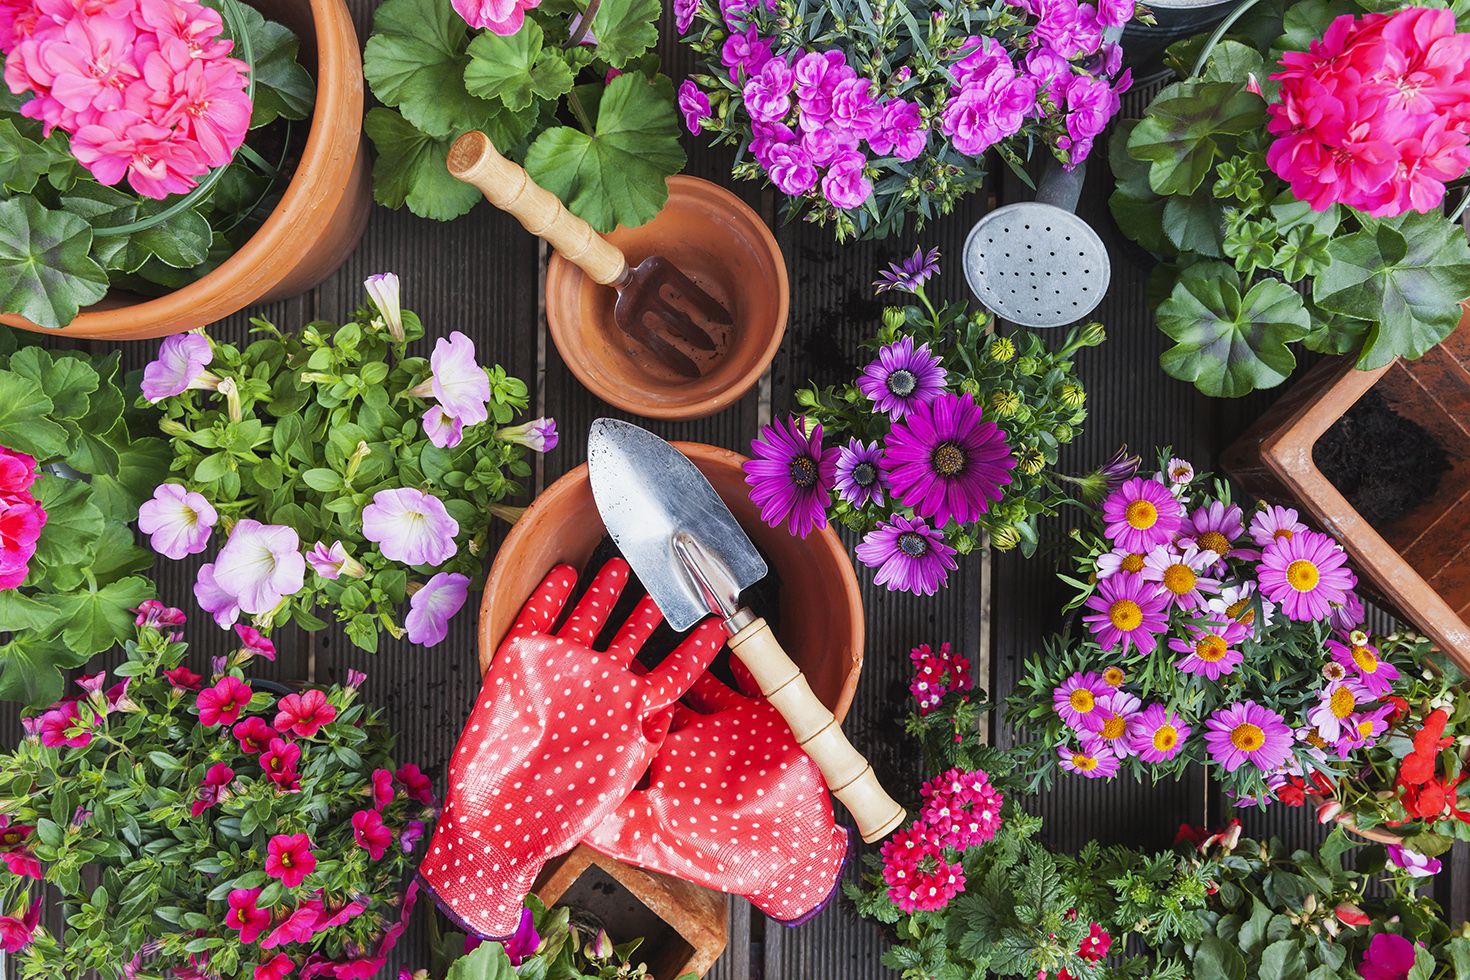 16 Unique Yard Tools That Will Change Your Gardening Forever